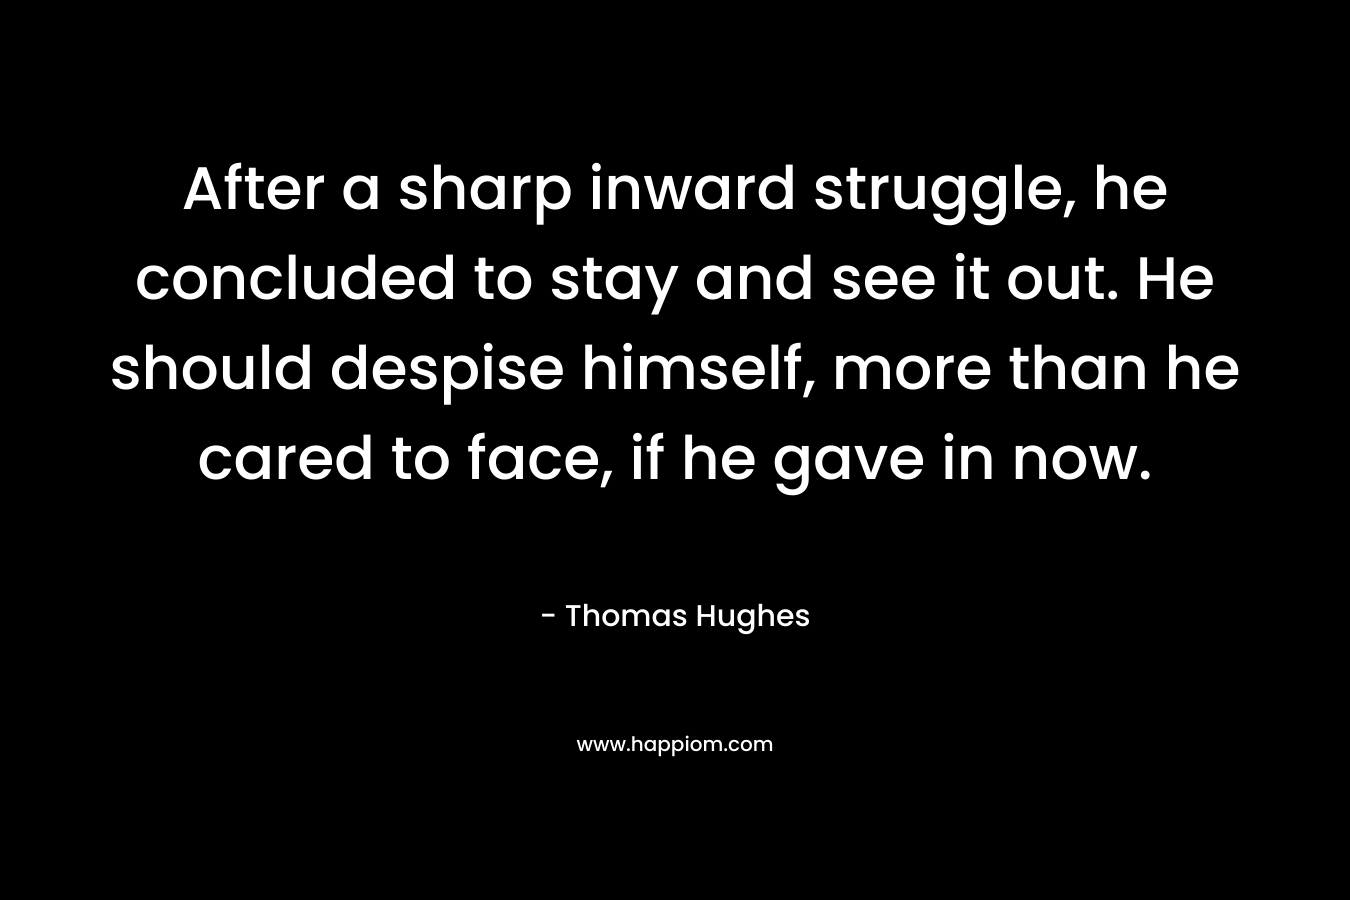 After a sharp inward struggle, he concluded to stay and see it out. He should despise himself, more than he cared to face, if he gave in now.